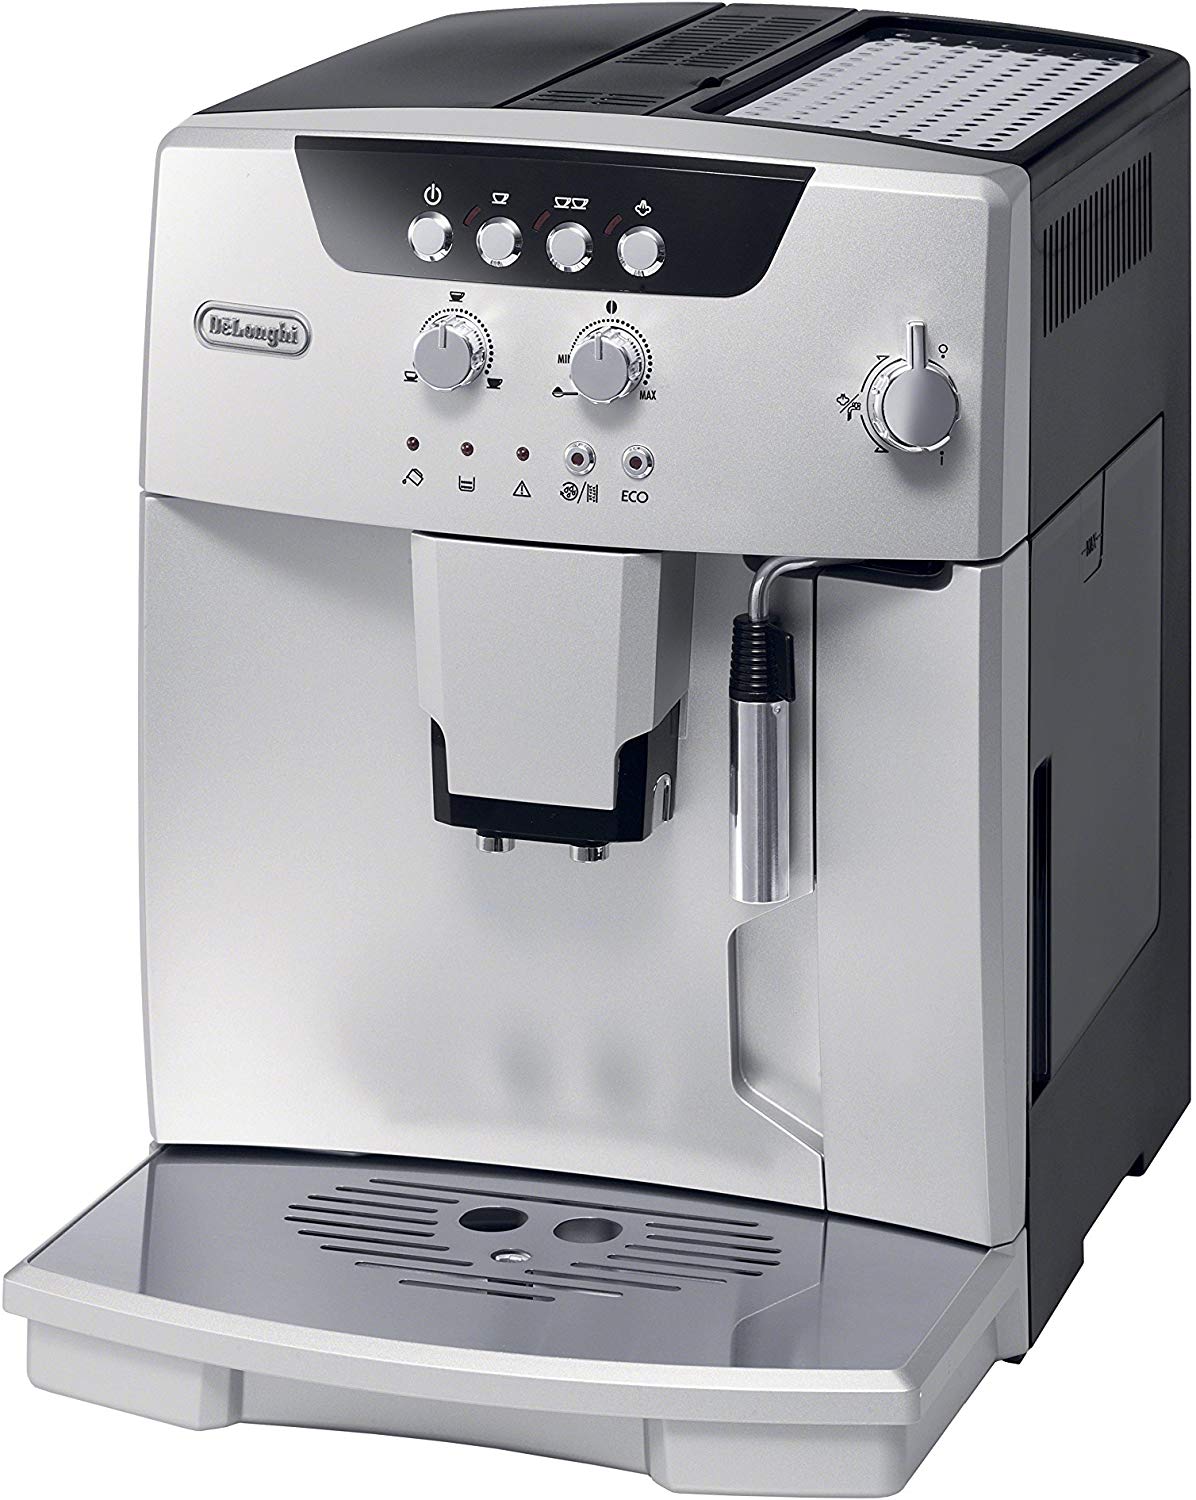 Top 3 Automatic Coffee Machine of 2019